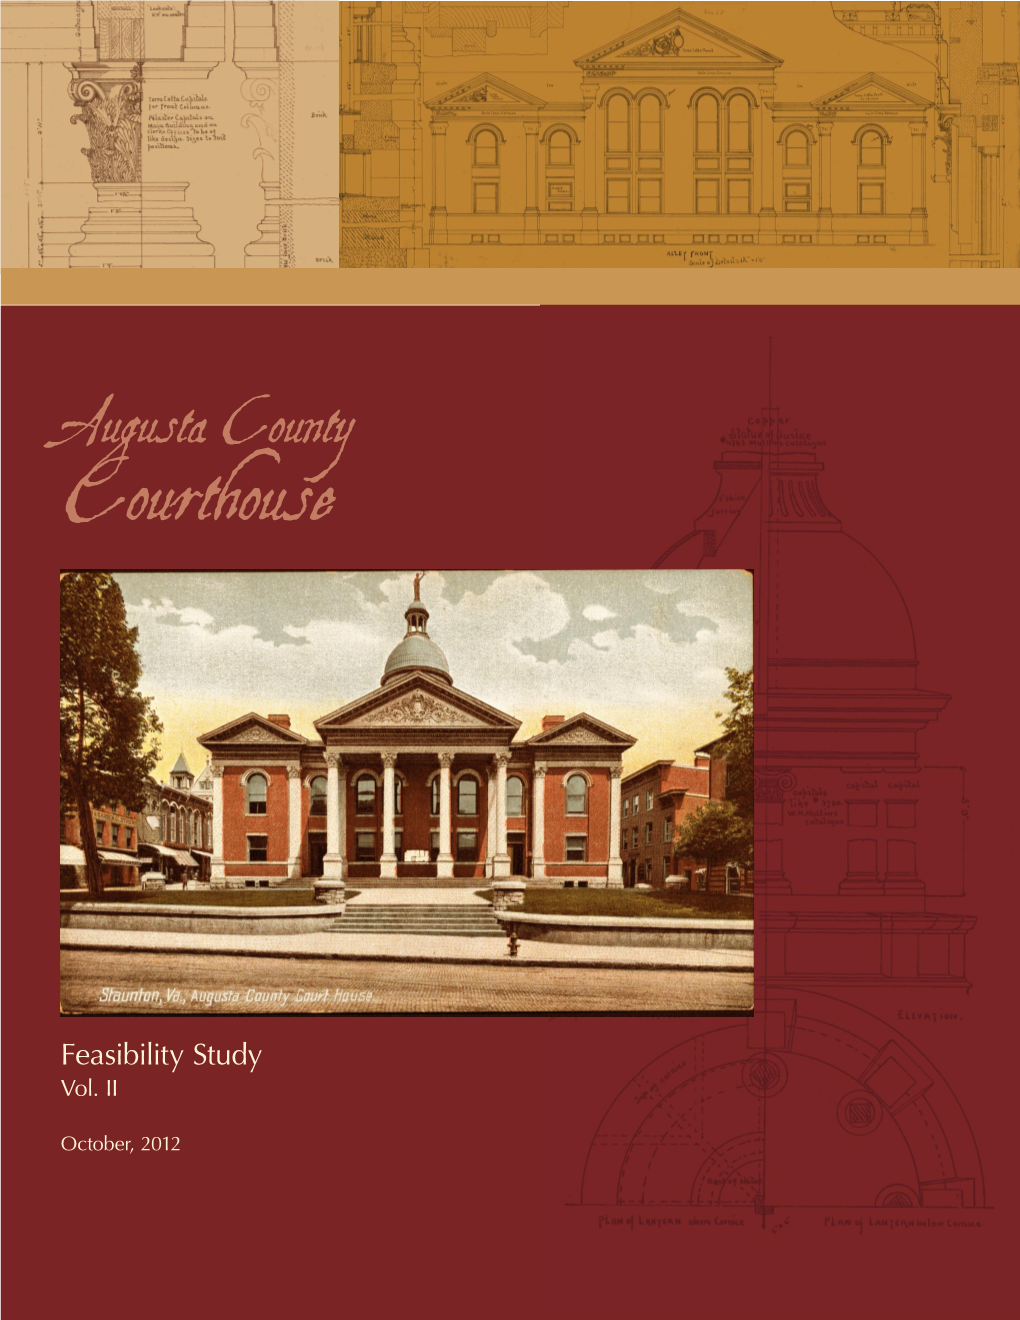 Augusta County Courthouse Study Vol.II